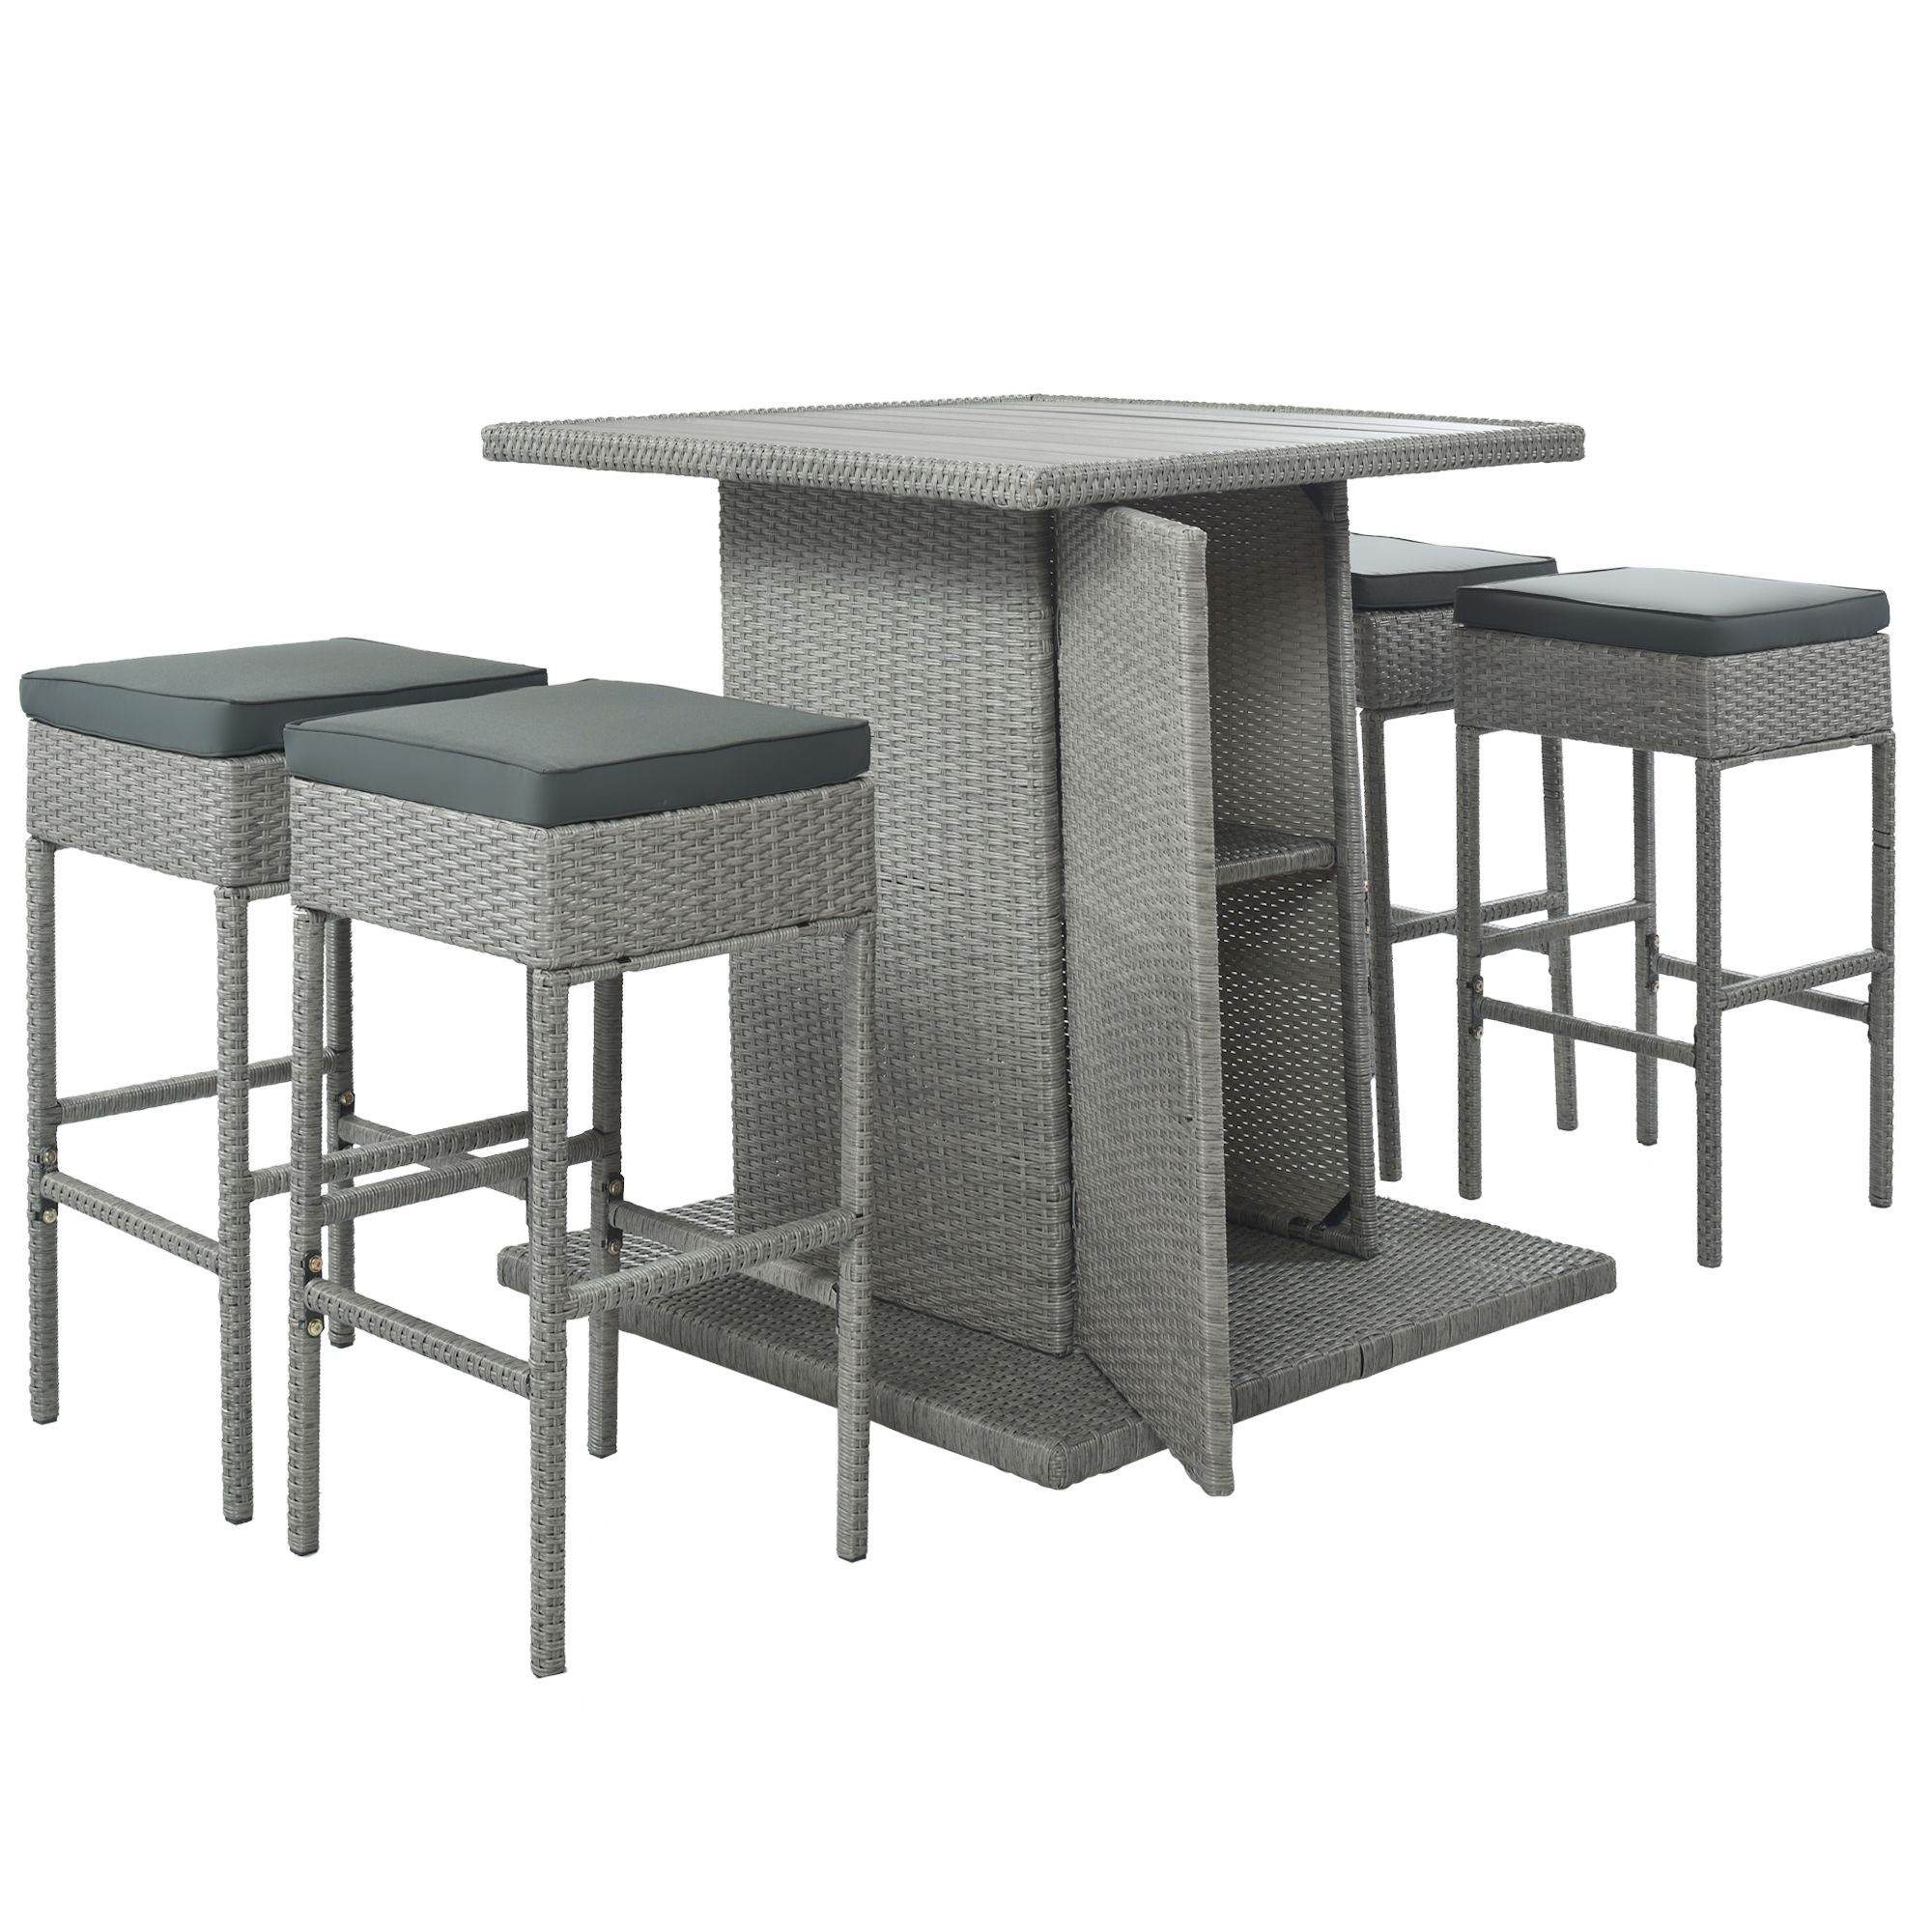  Patio 5-Piece Rattan Dining Table Set, PE Wicker Square Kitchen Table Set with Storage Shelf and 4 Padded Stools for Poolside, Garden, Gray Wicker+Dark Gray Cushion-CASAINC